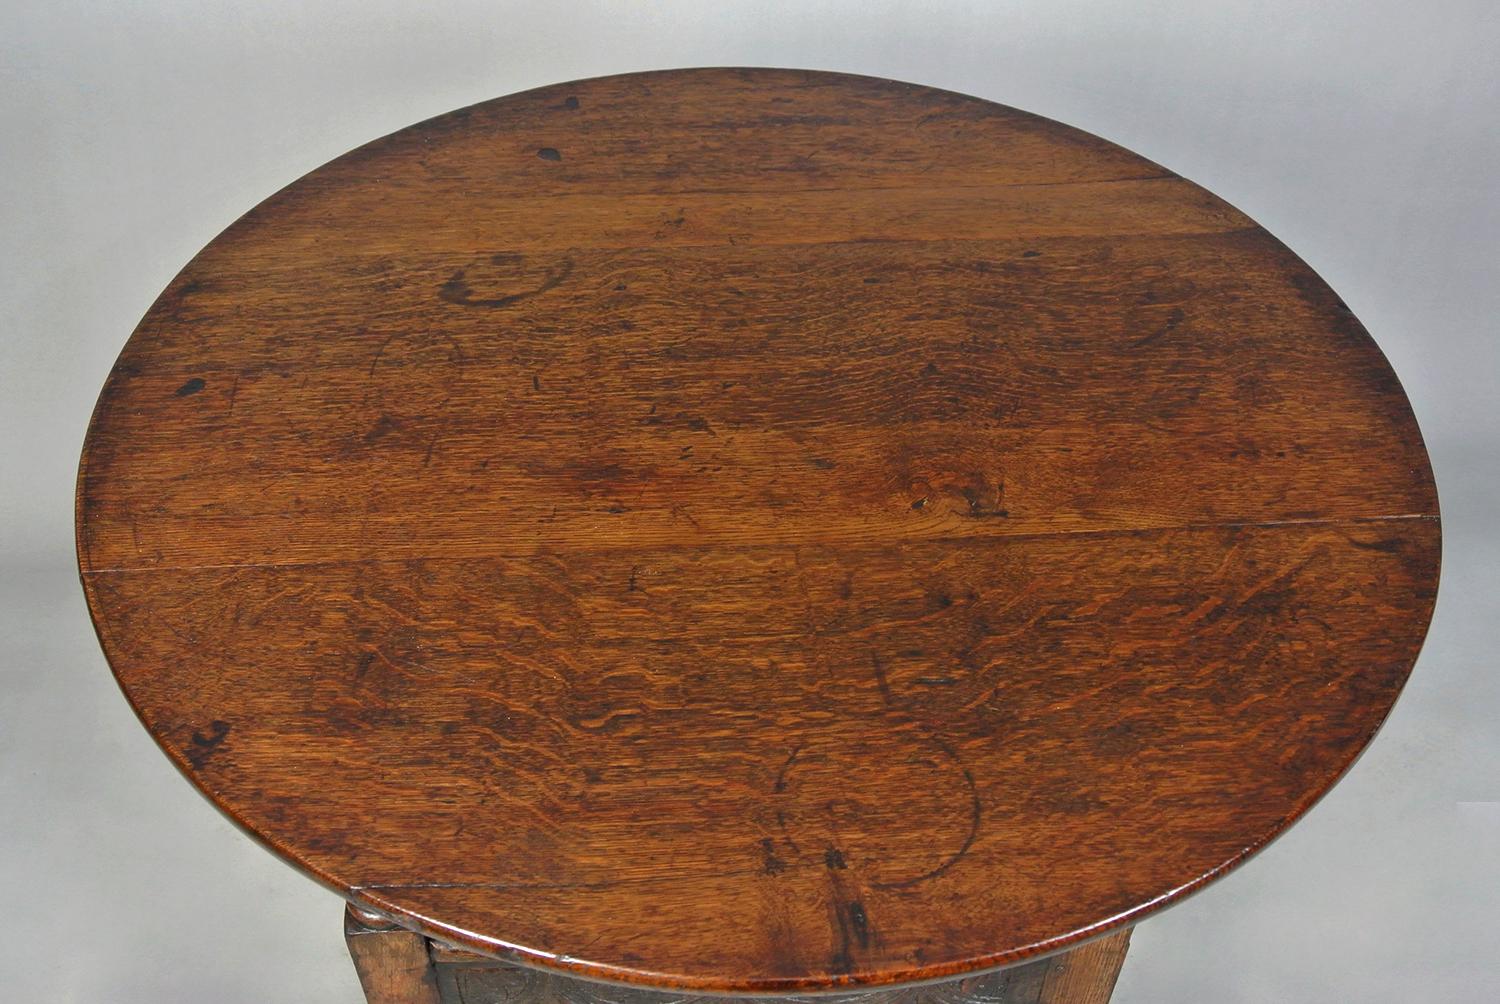 A good oak monk’s table with original timbers throughout.

This is a beautiful side table with a lovely rich colour and patination which can easily convert to a chair, the top pivots up to form the back panel of the chair.

The oak cut to reveal the